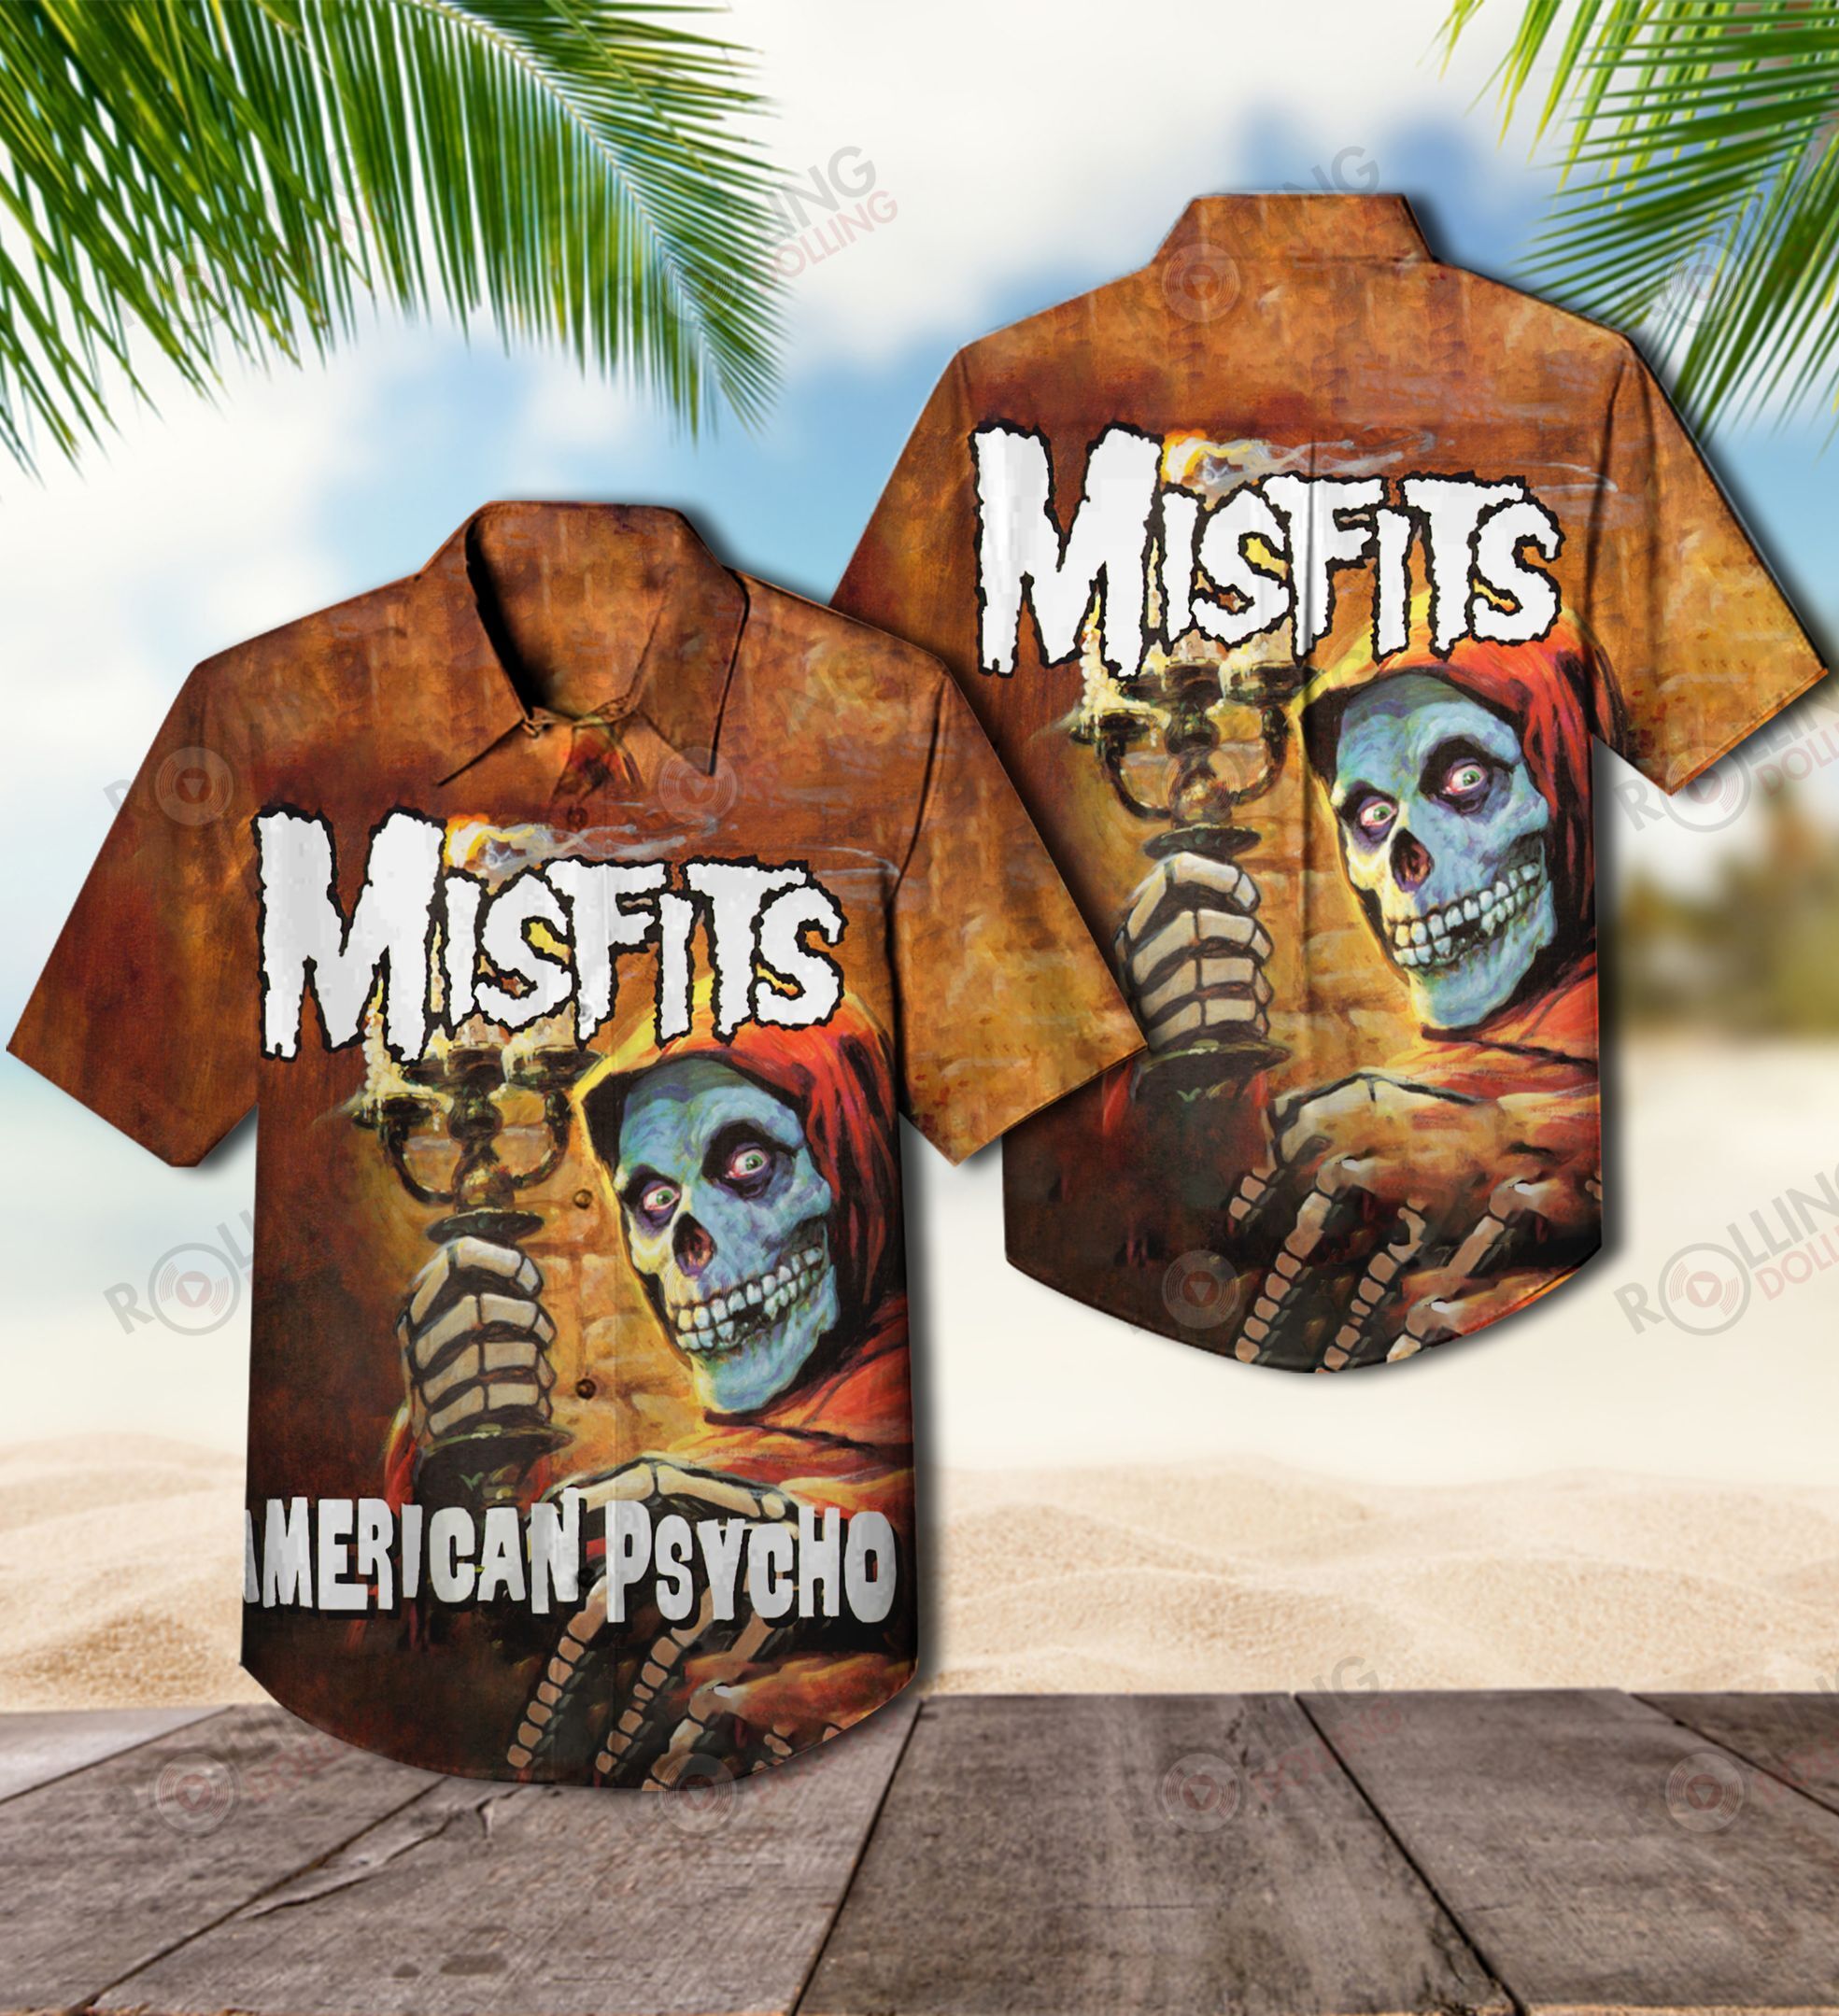 This would make a great gift for any fan who loves Hawaiian Shirt as well as Rock band 20